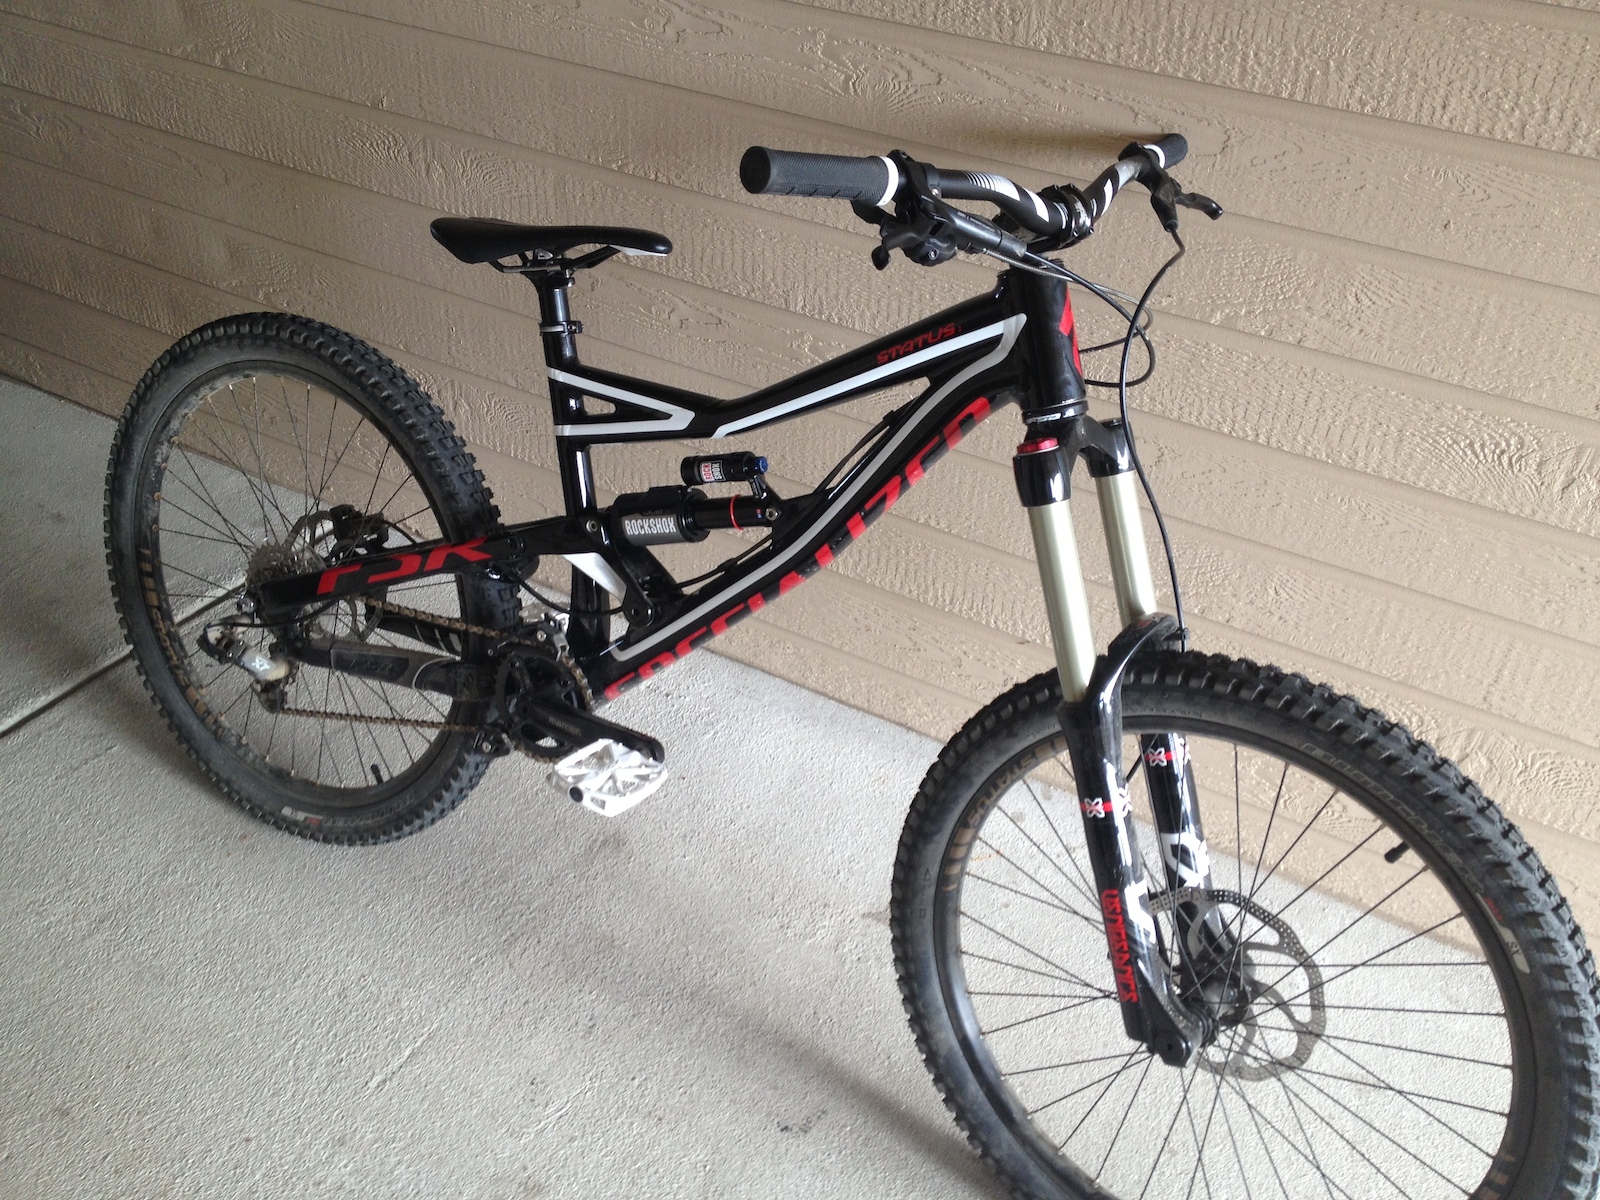 2013 Specialized Status 1 with new Vivid air shock